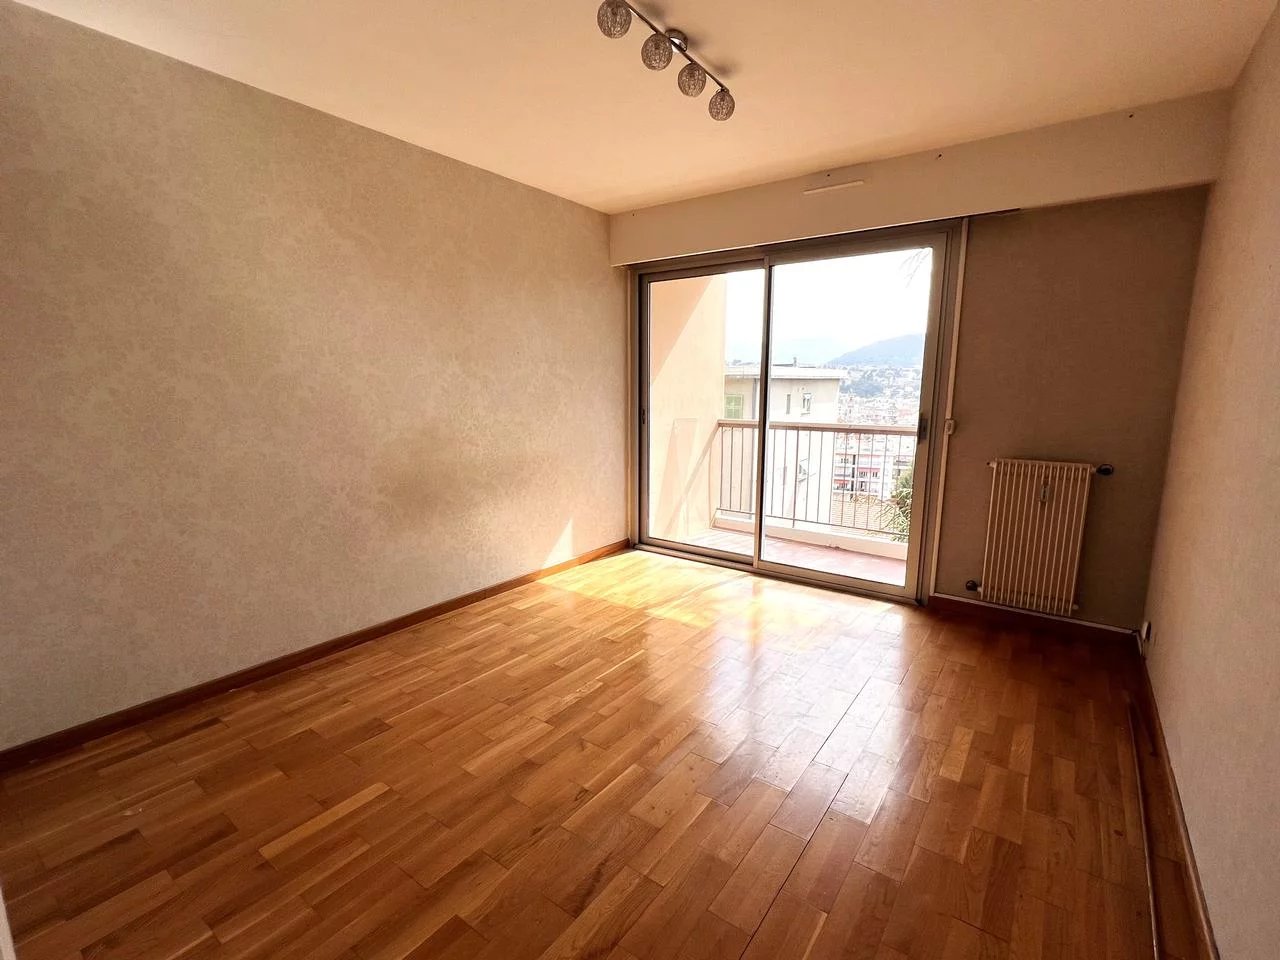 Appartement  2 Rooms 50.33m2  for sale   190 000 €